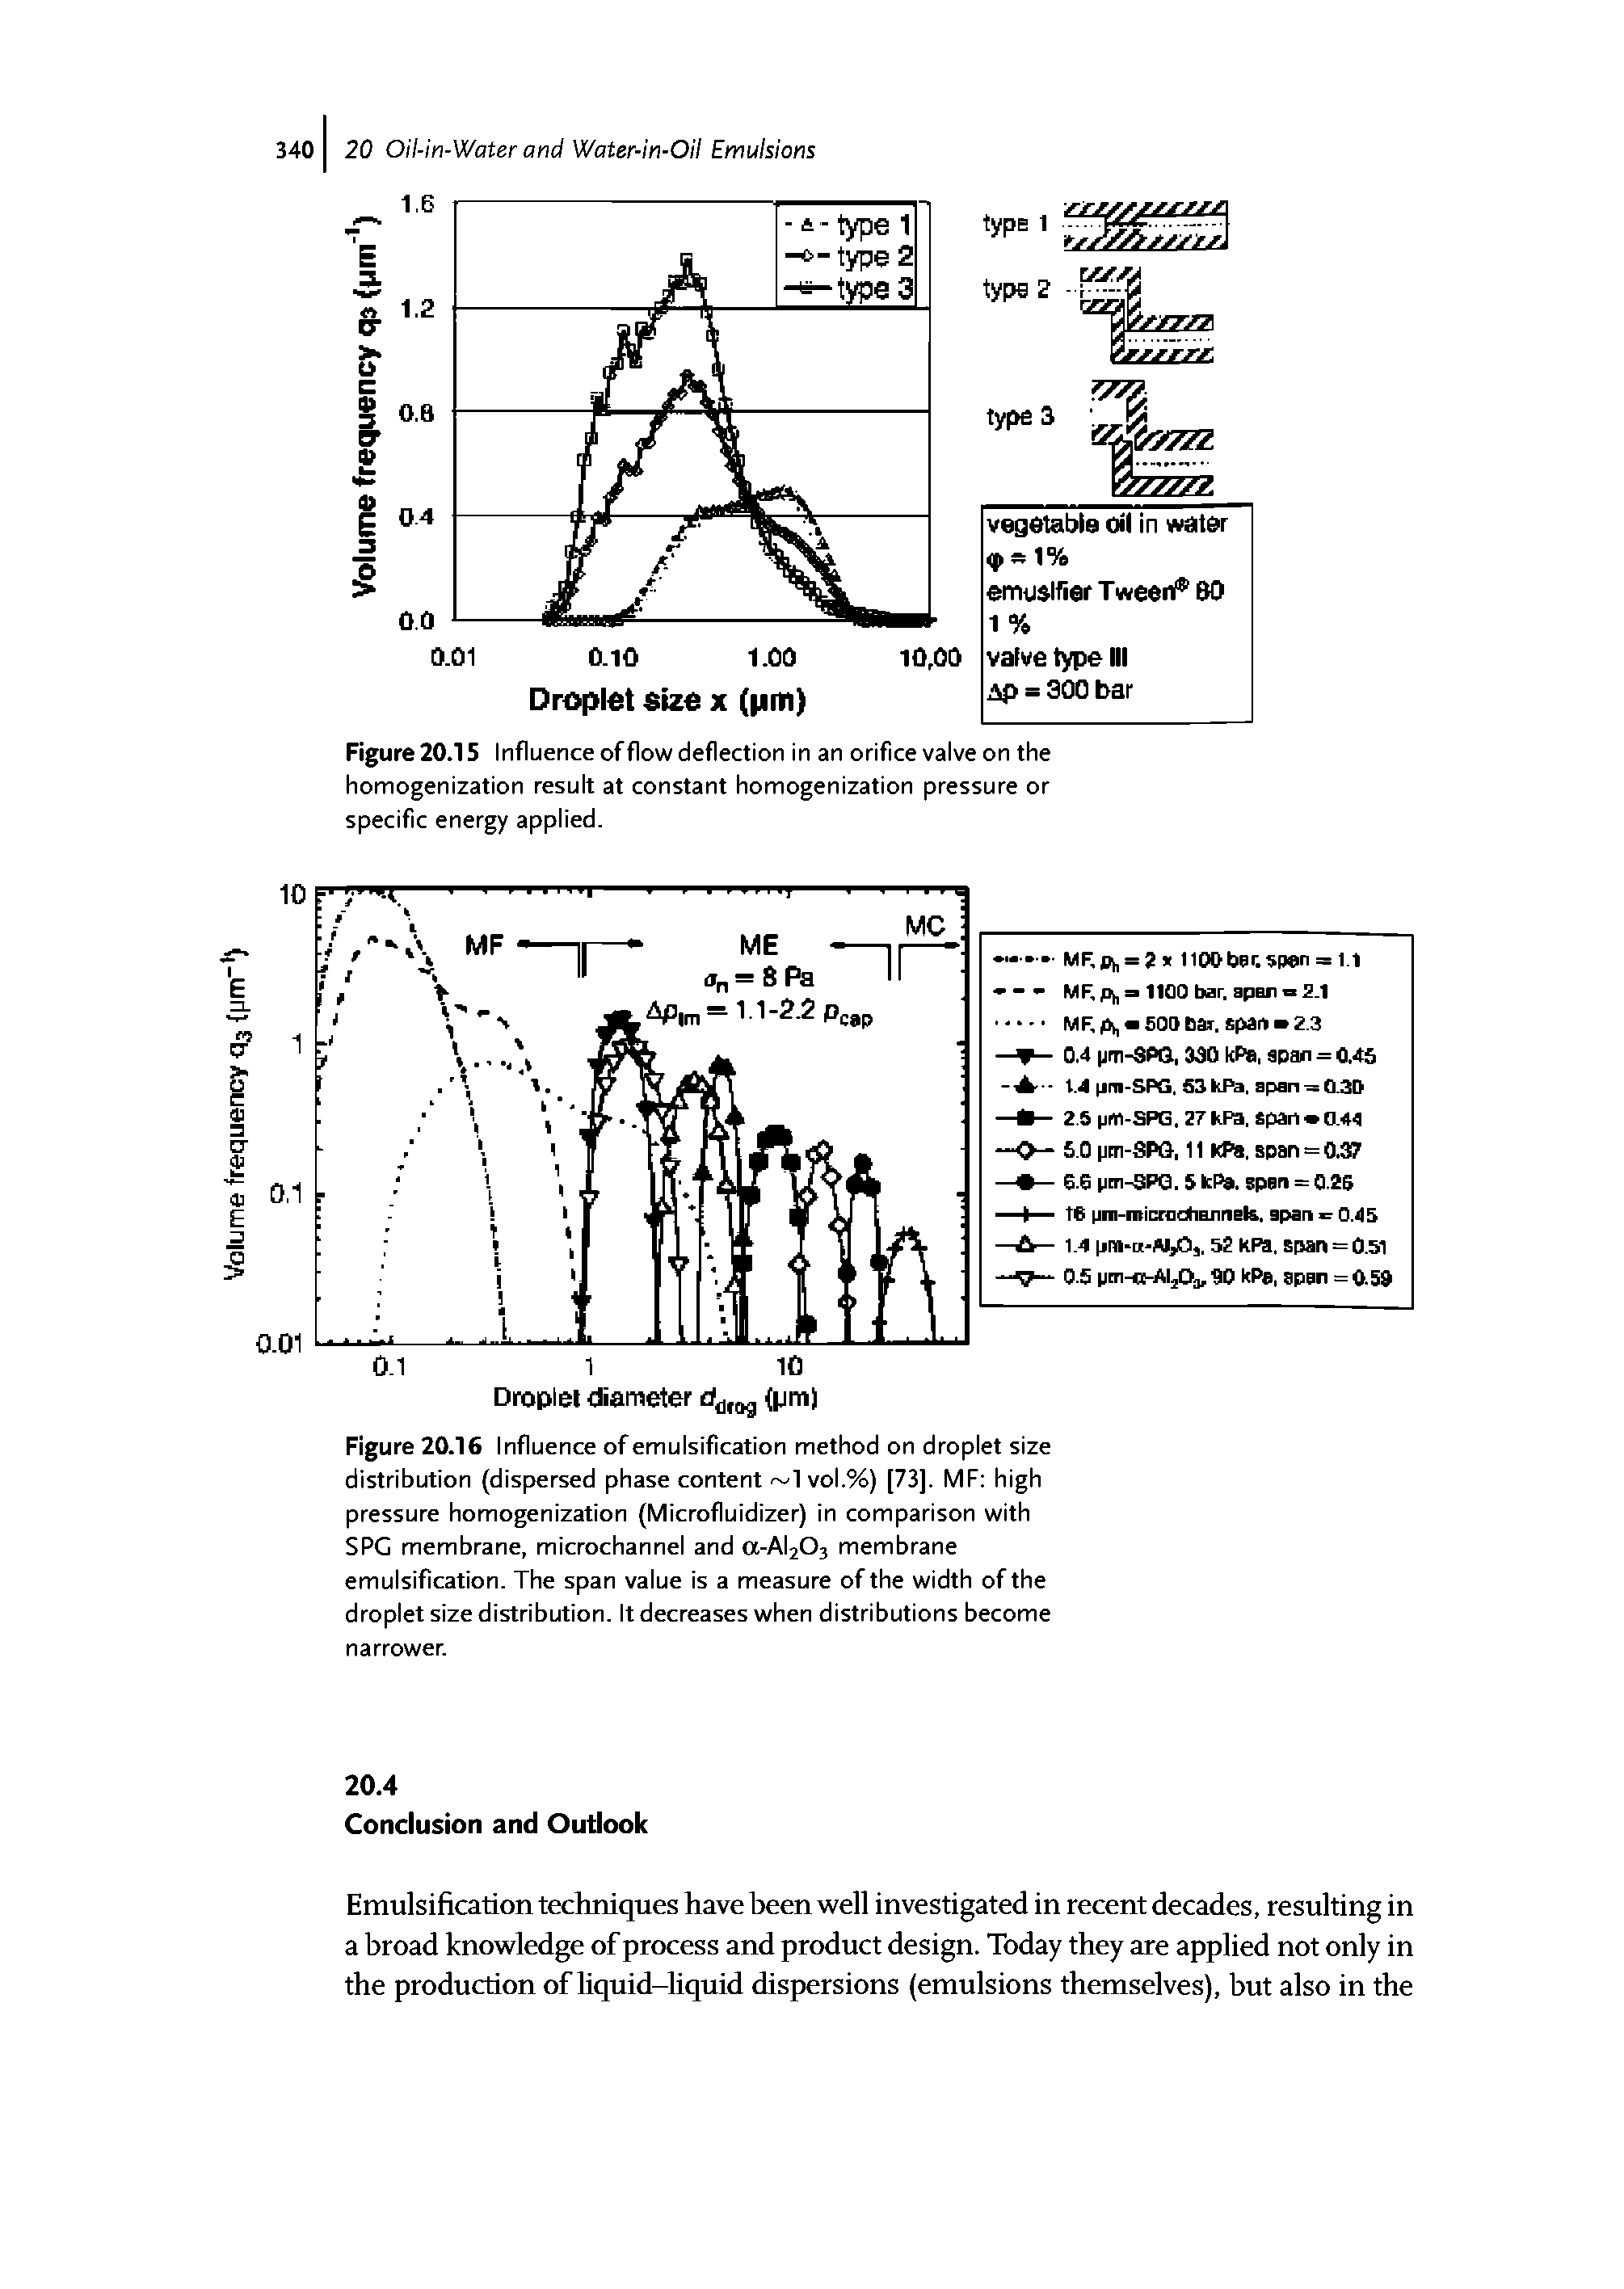 Figure 20.16 Influence of emulsification method on droplet size distribution (dispersed phase content 1 vol.%) [73]. MF high pressure homogenization (Microfluidizer) in comparison with SPG membrane, microchannel and a-Al203 membrane emulsification. The span value is a measure of the width of the droplet size distribution. It decreases when distributions become narrower.